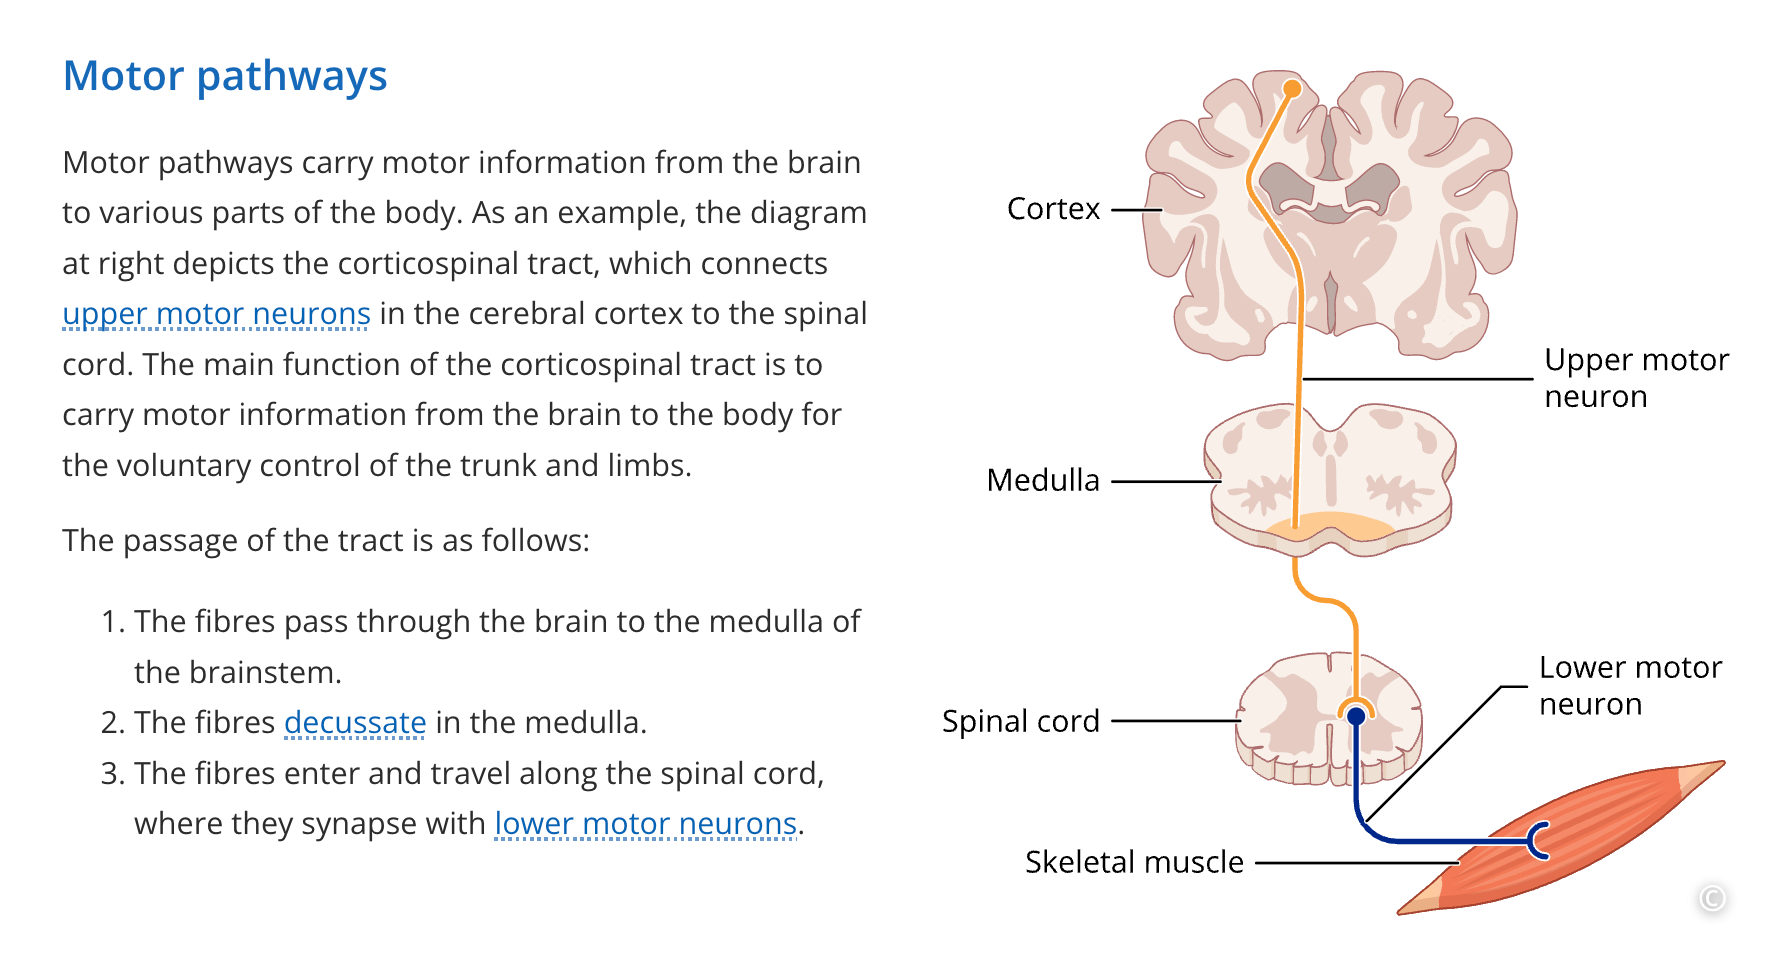 A screenshot of text and an image in Lt explaining the motor pathways of the central nervous system.